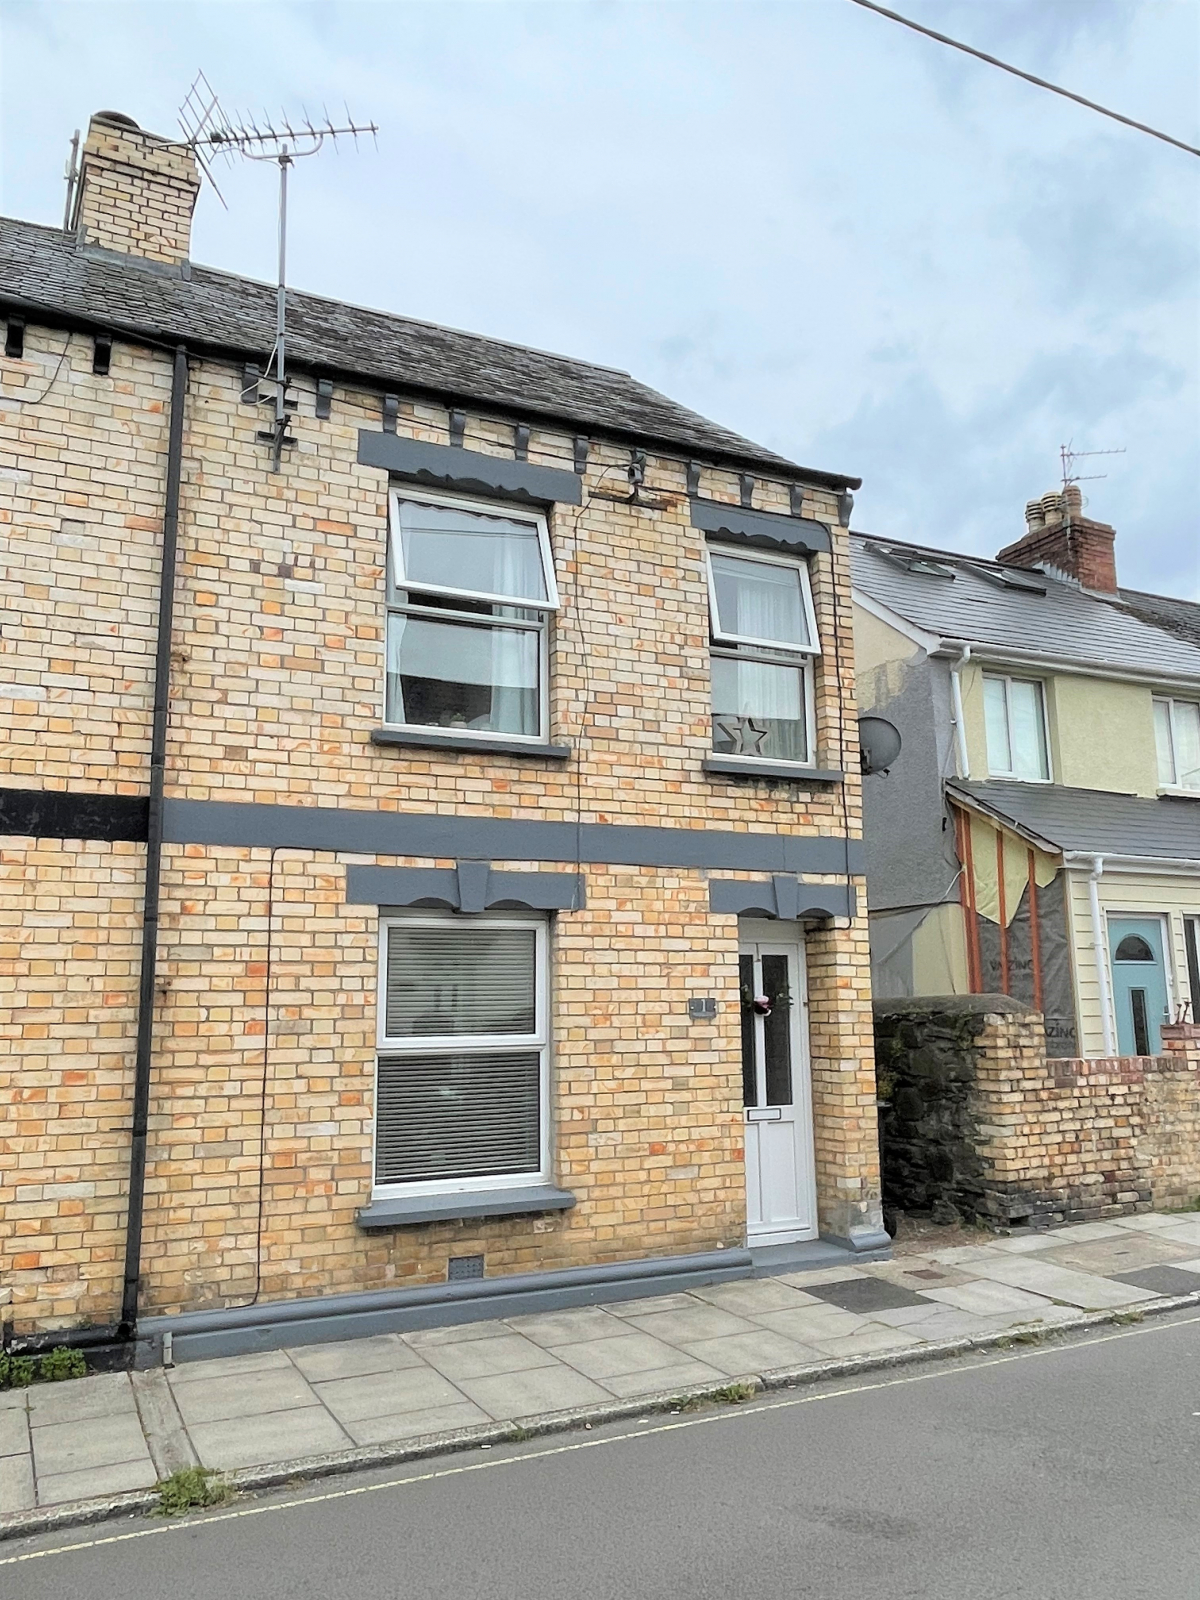 3 bed end of terrace house for sale, Devon 0